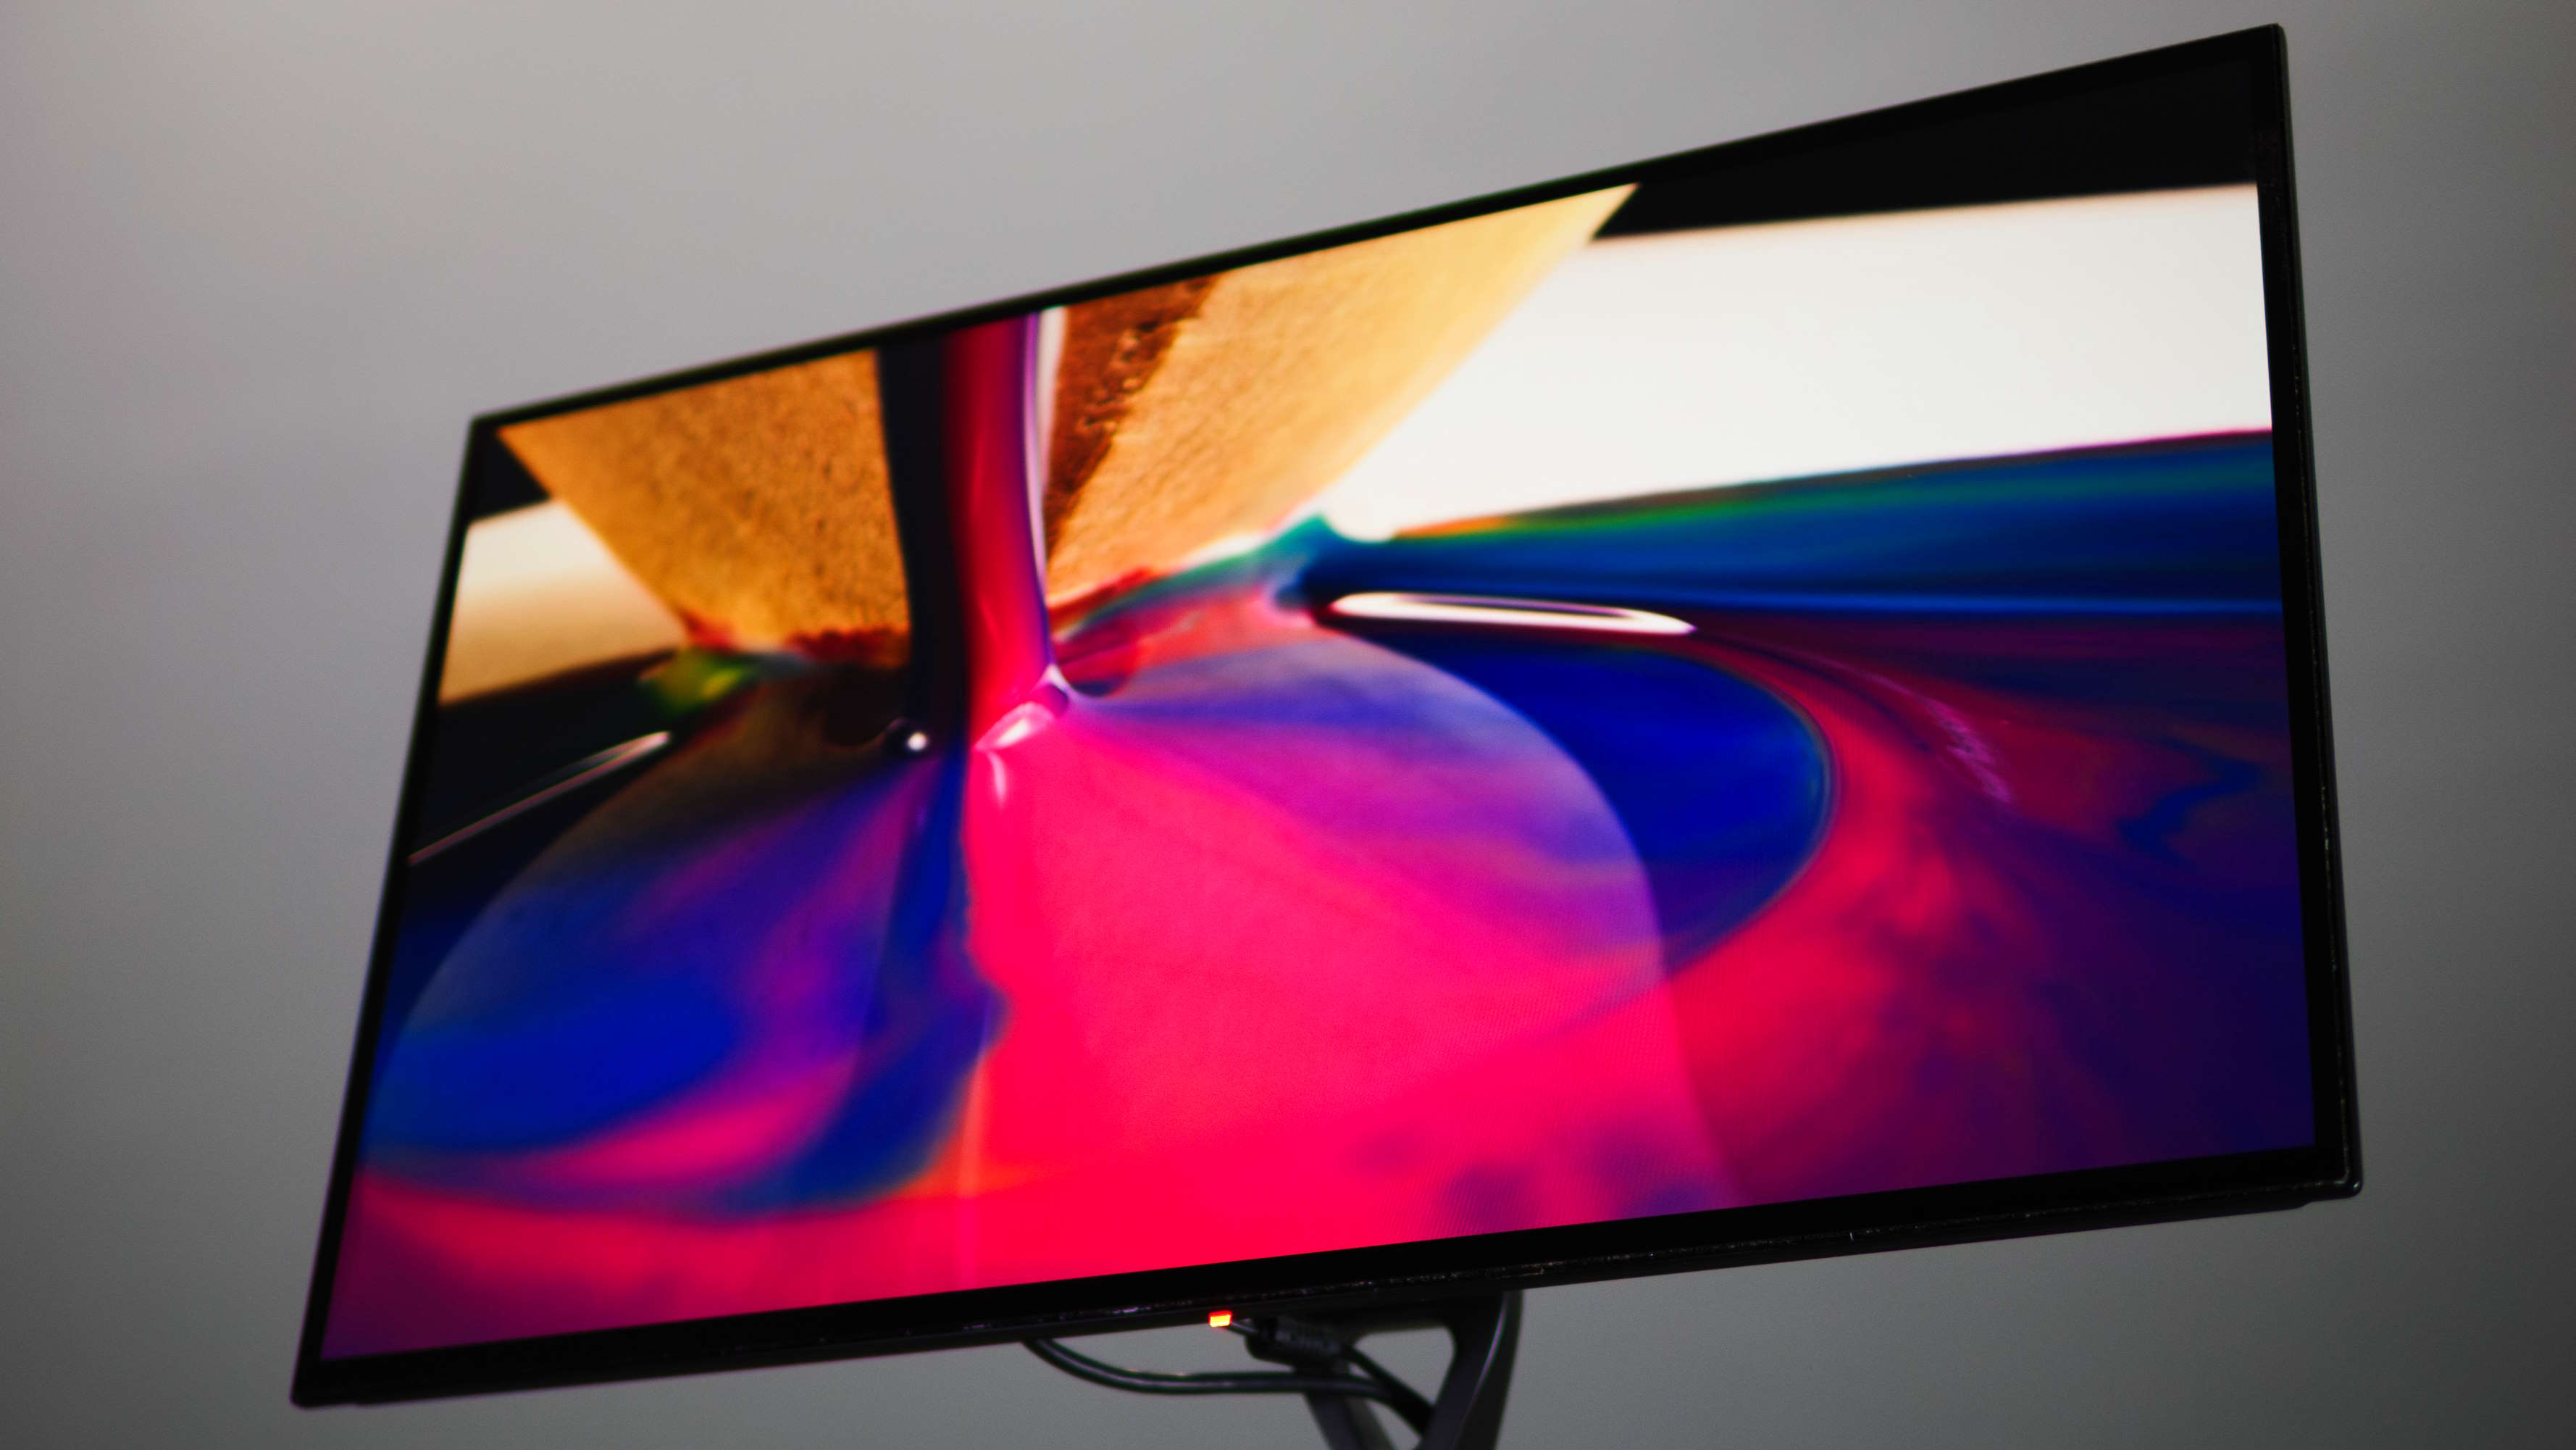 LG just made the fastest OLED gaming display yet - The Verge